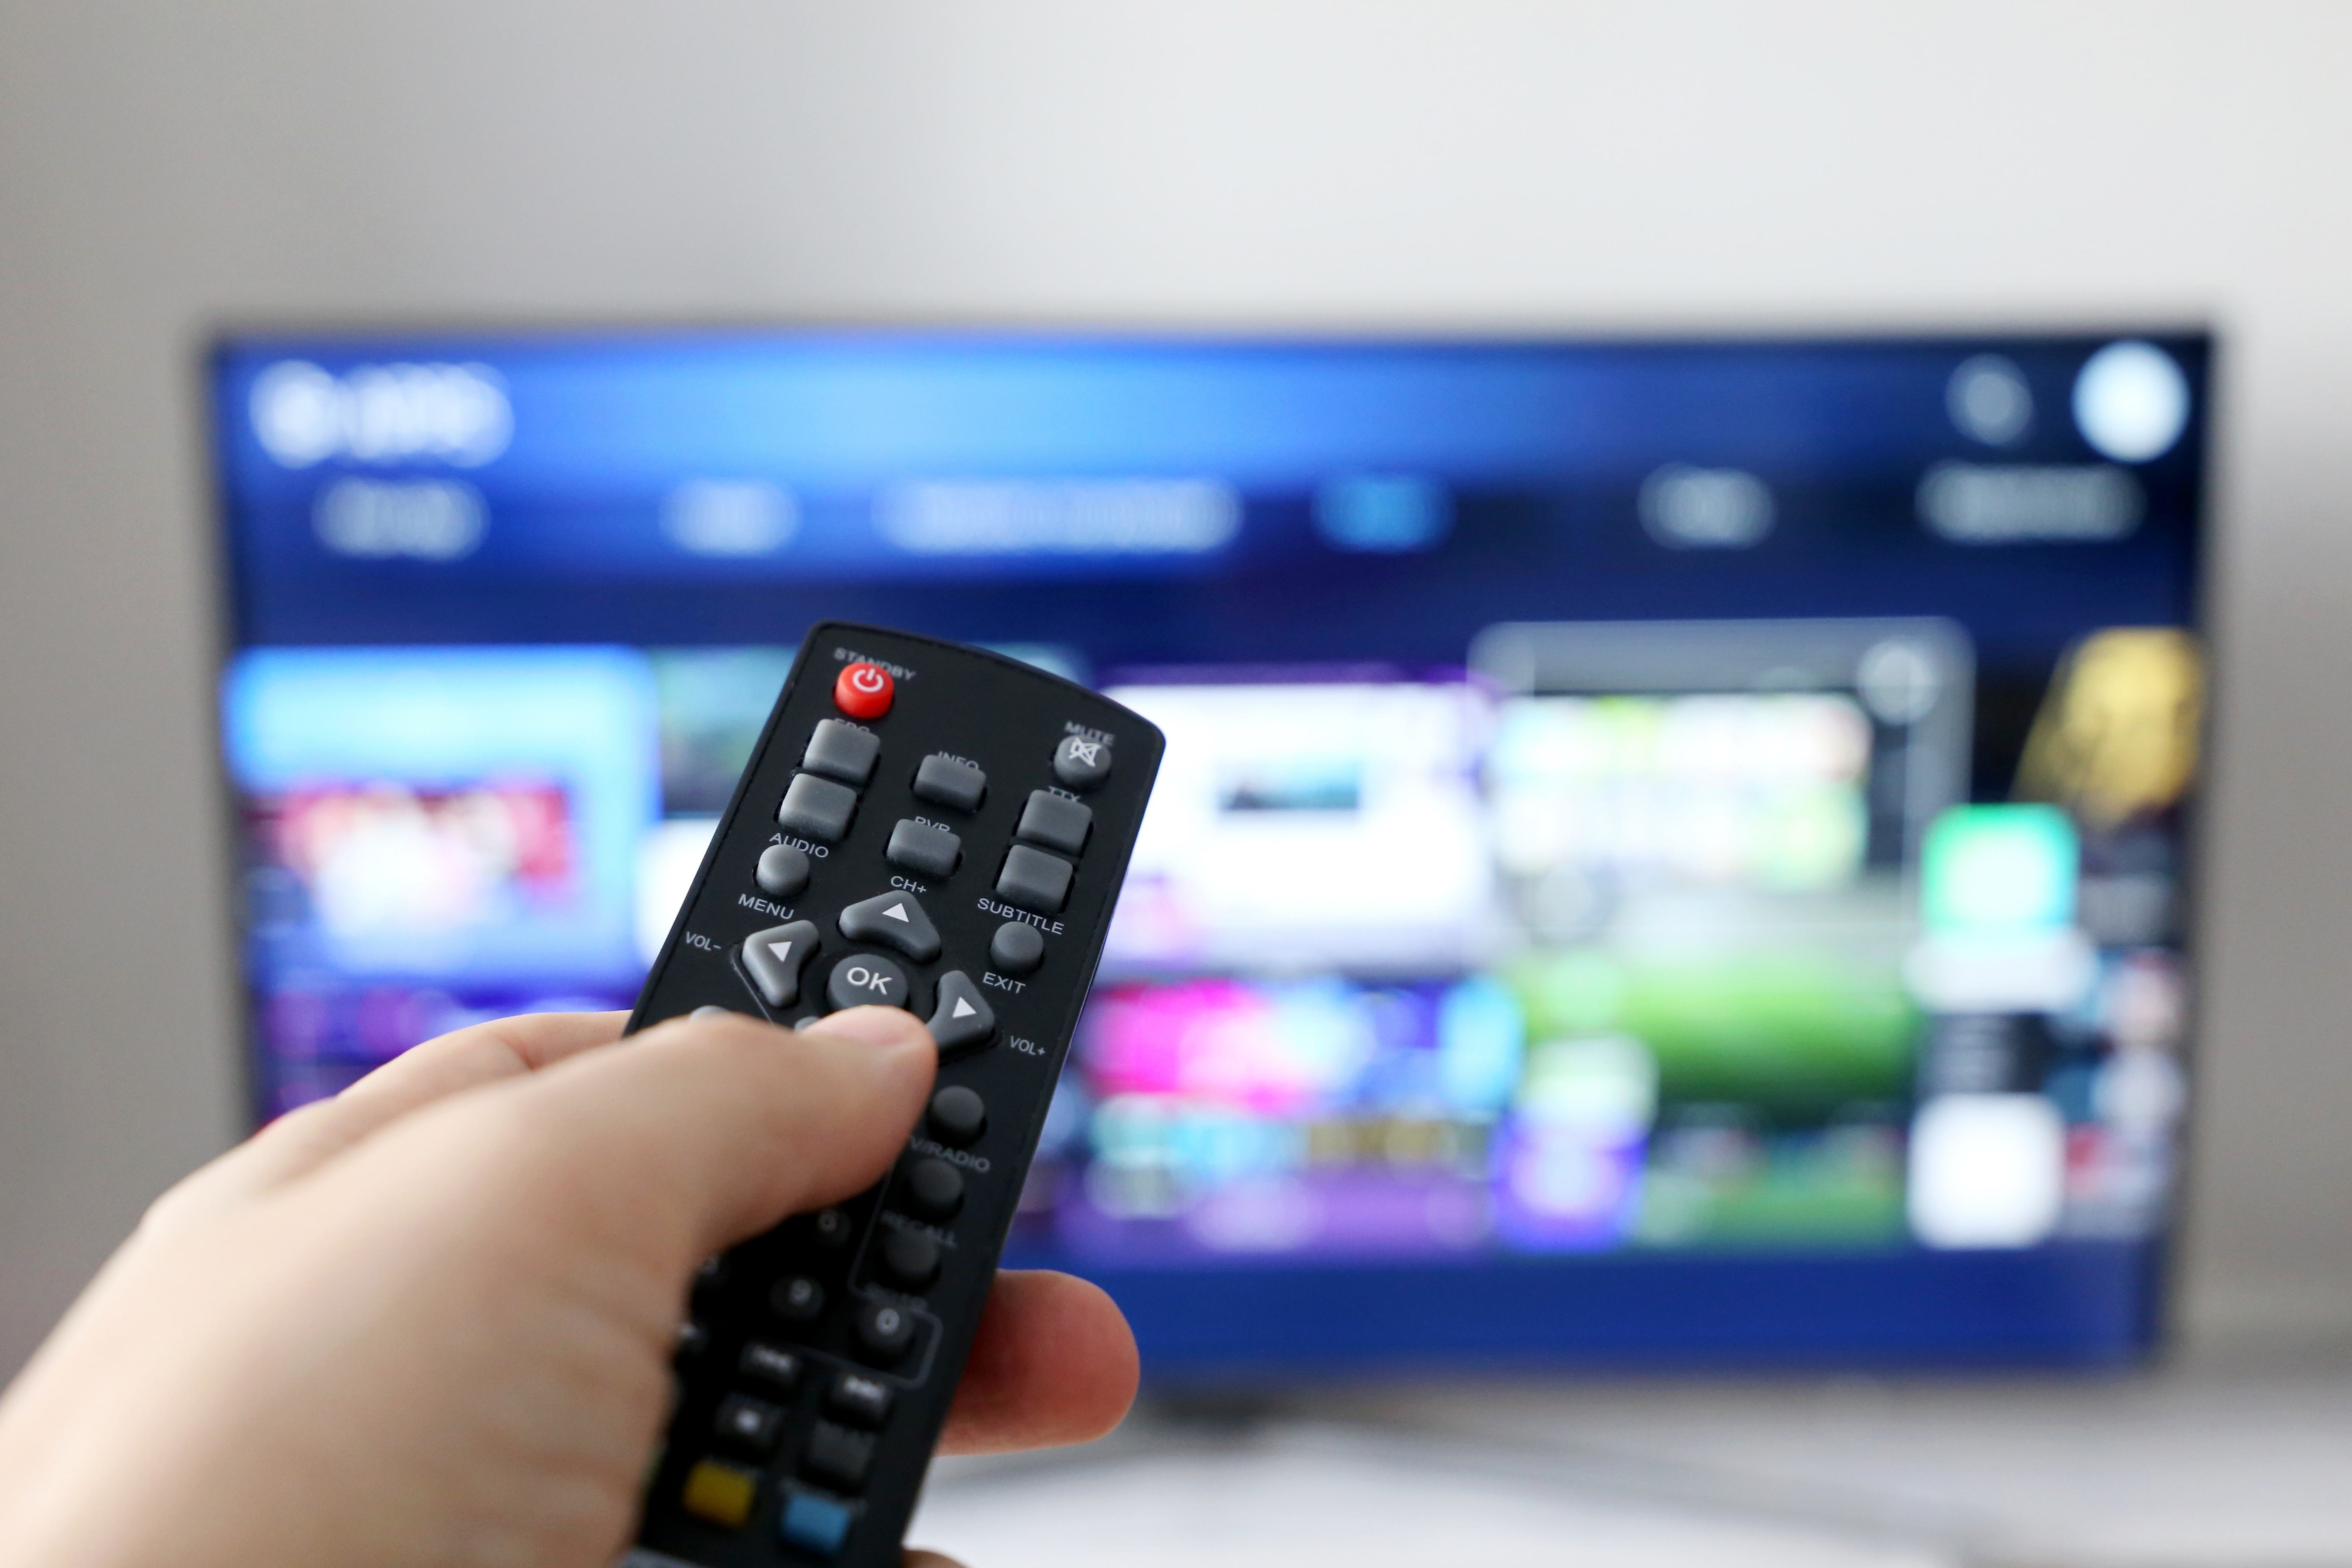 Weekend Wrap-Up: Comcast Xfinity Raising Price, New Roku Channel Holiday Content, and More